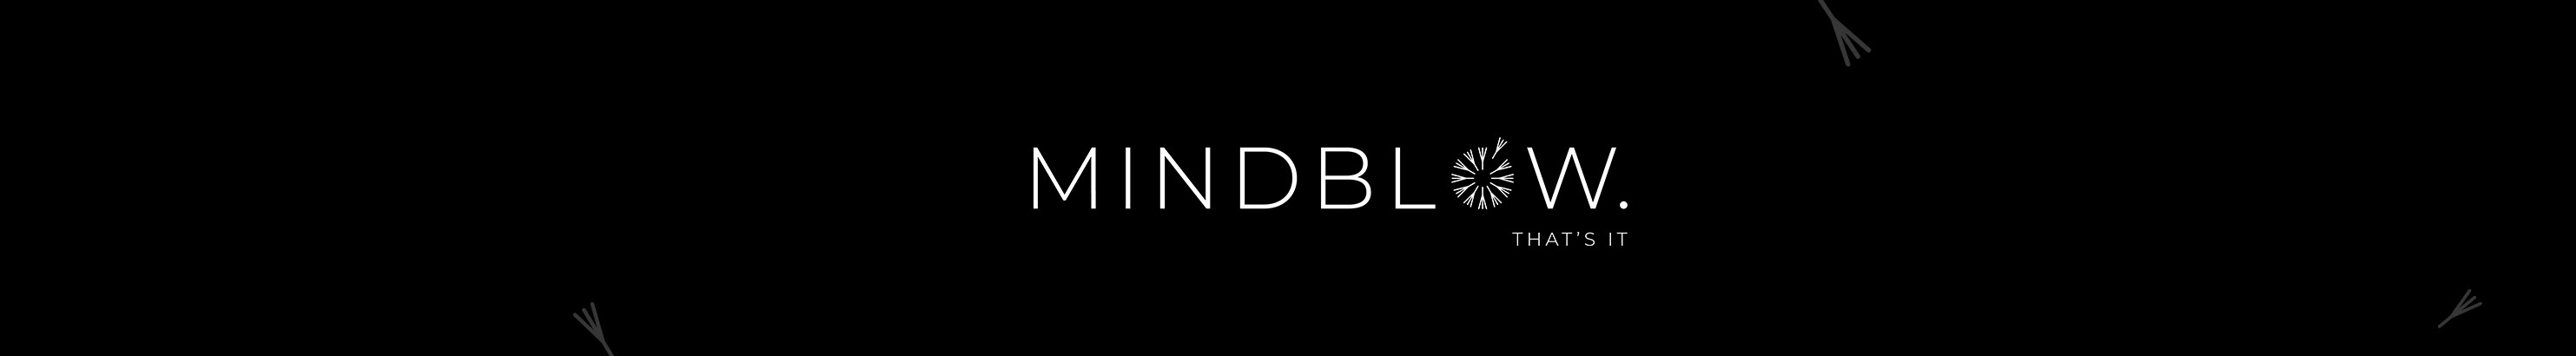 Mindblow Agency's profile banner